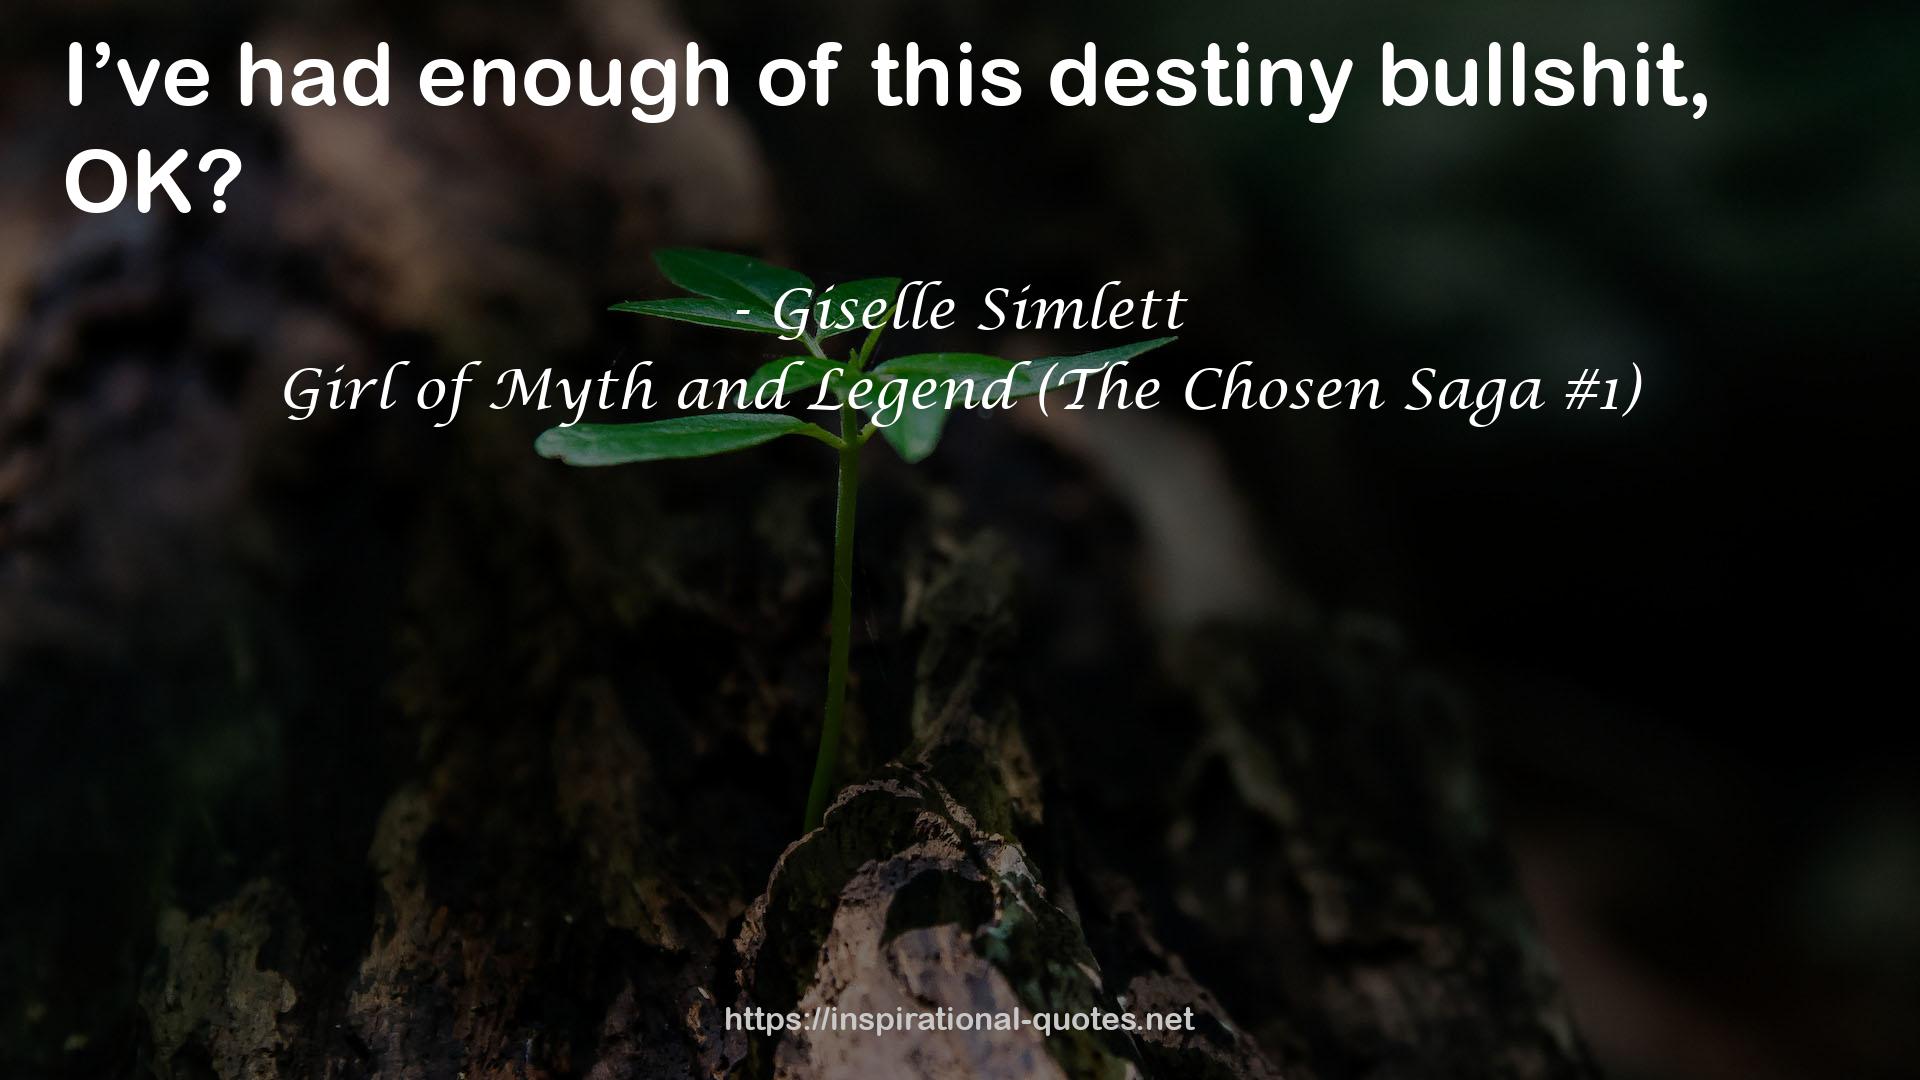 Girl of Myth and Legend (The Chosen Saga #1) QUOTES